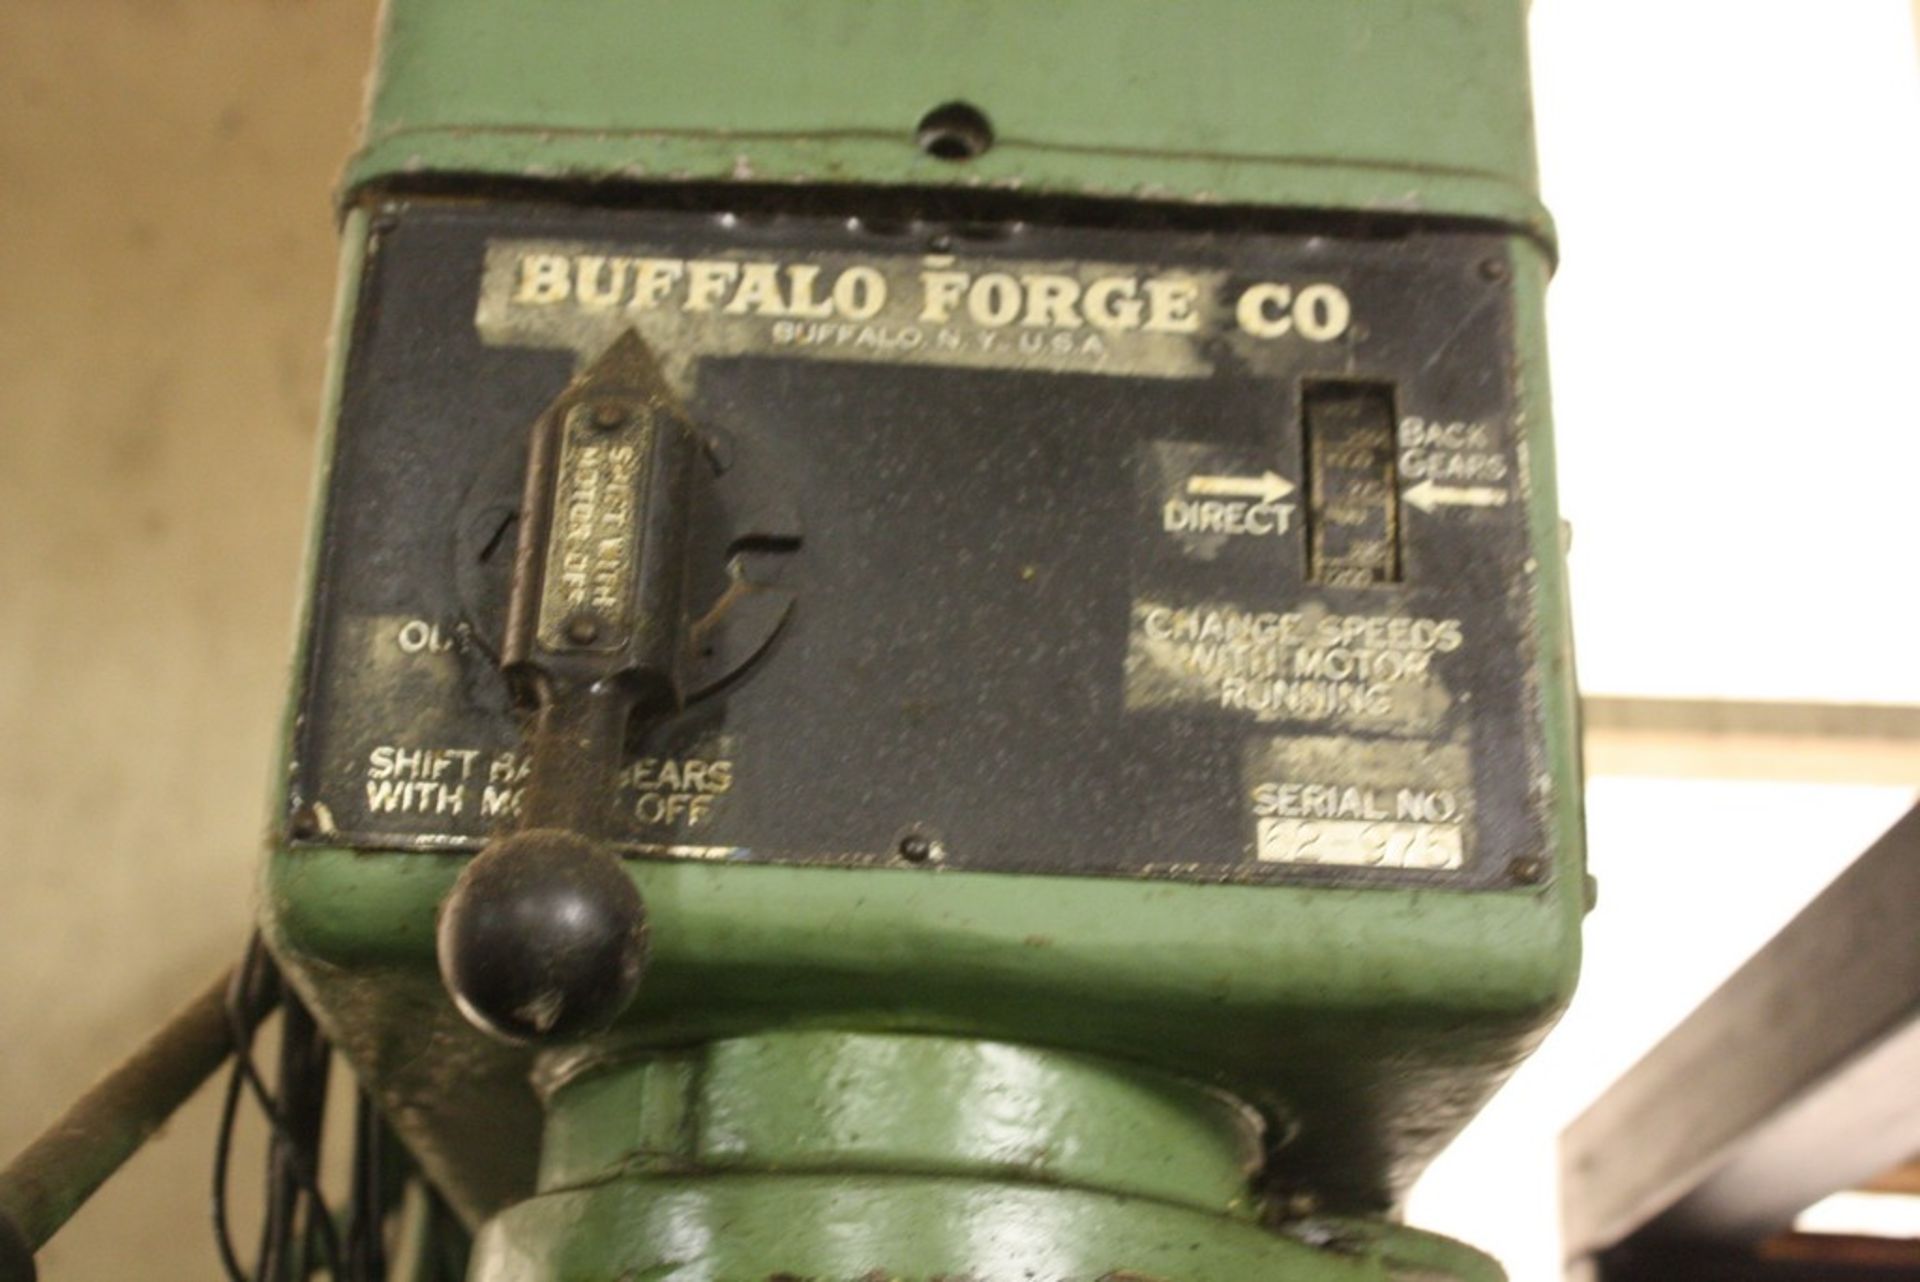 BUFFALO FORGE 26" PRODUCTION DRILL PRESS WITH POWER FEED S/N 62-875 - Image 4 of 4